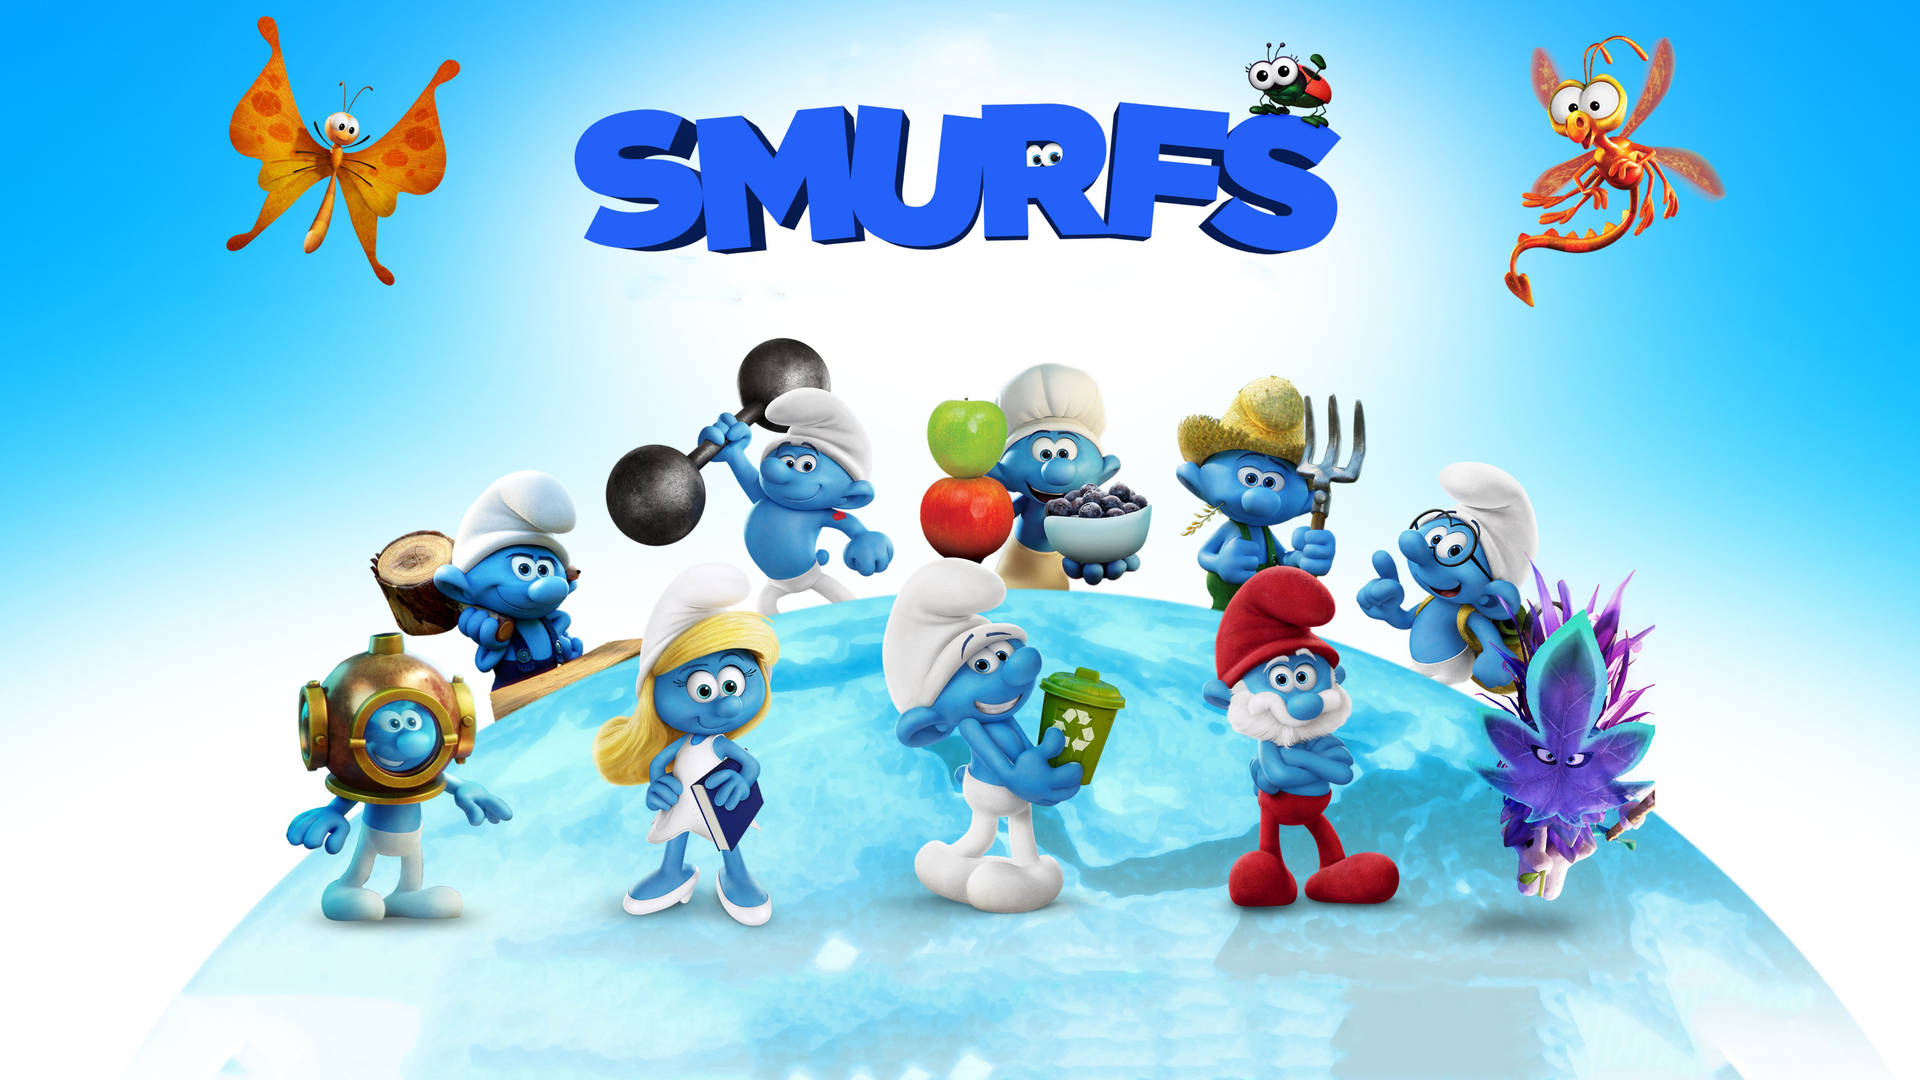 Free The Smurfs Wallpaper Downloads, [100+] The Smurfs Wallpapers for FREE  